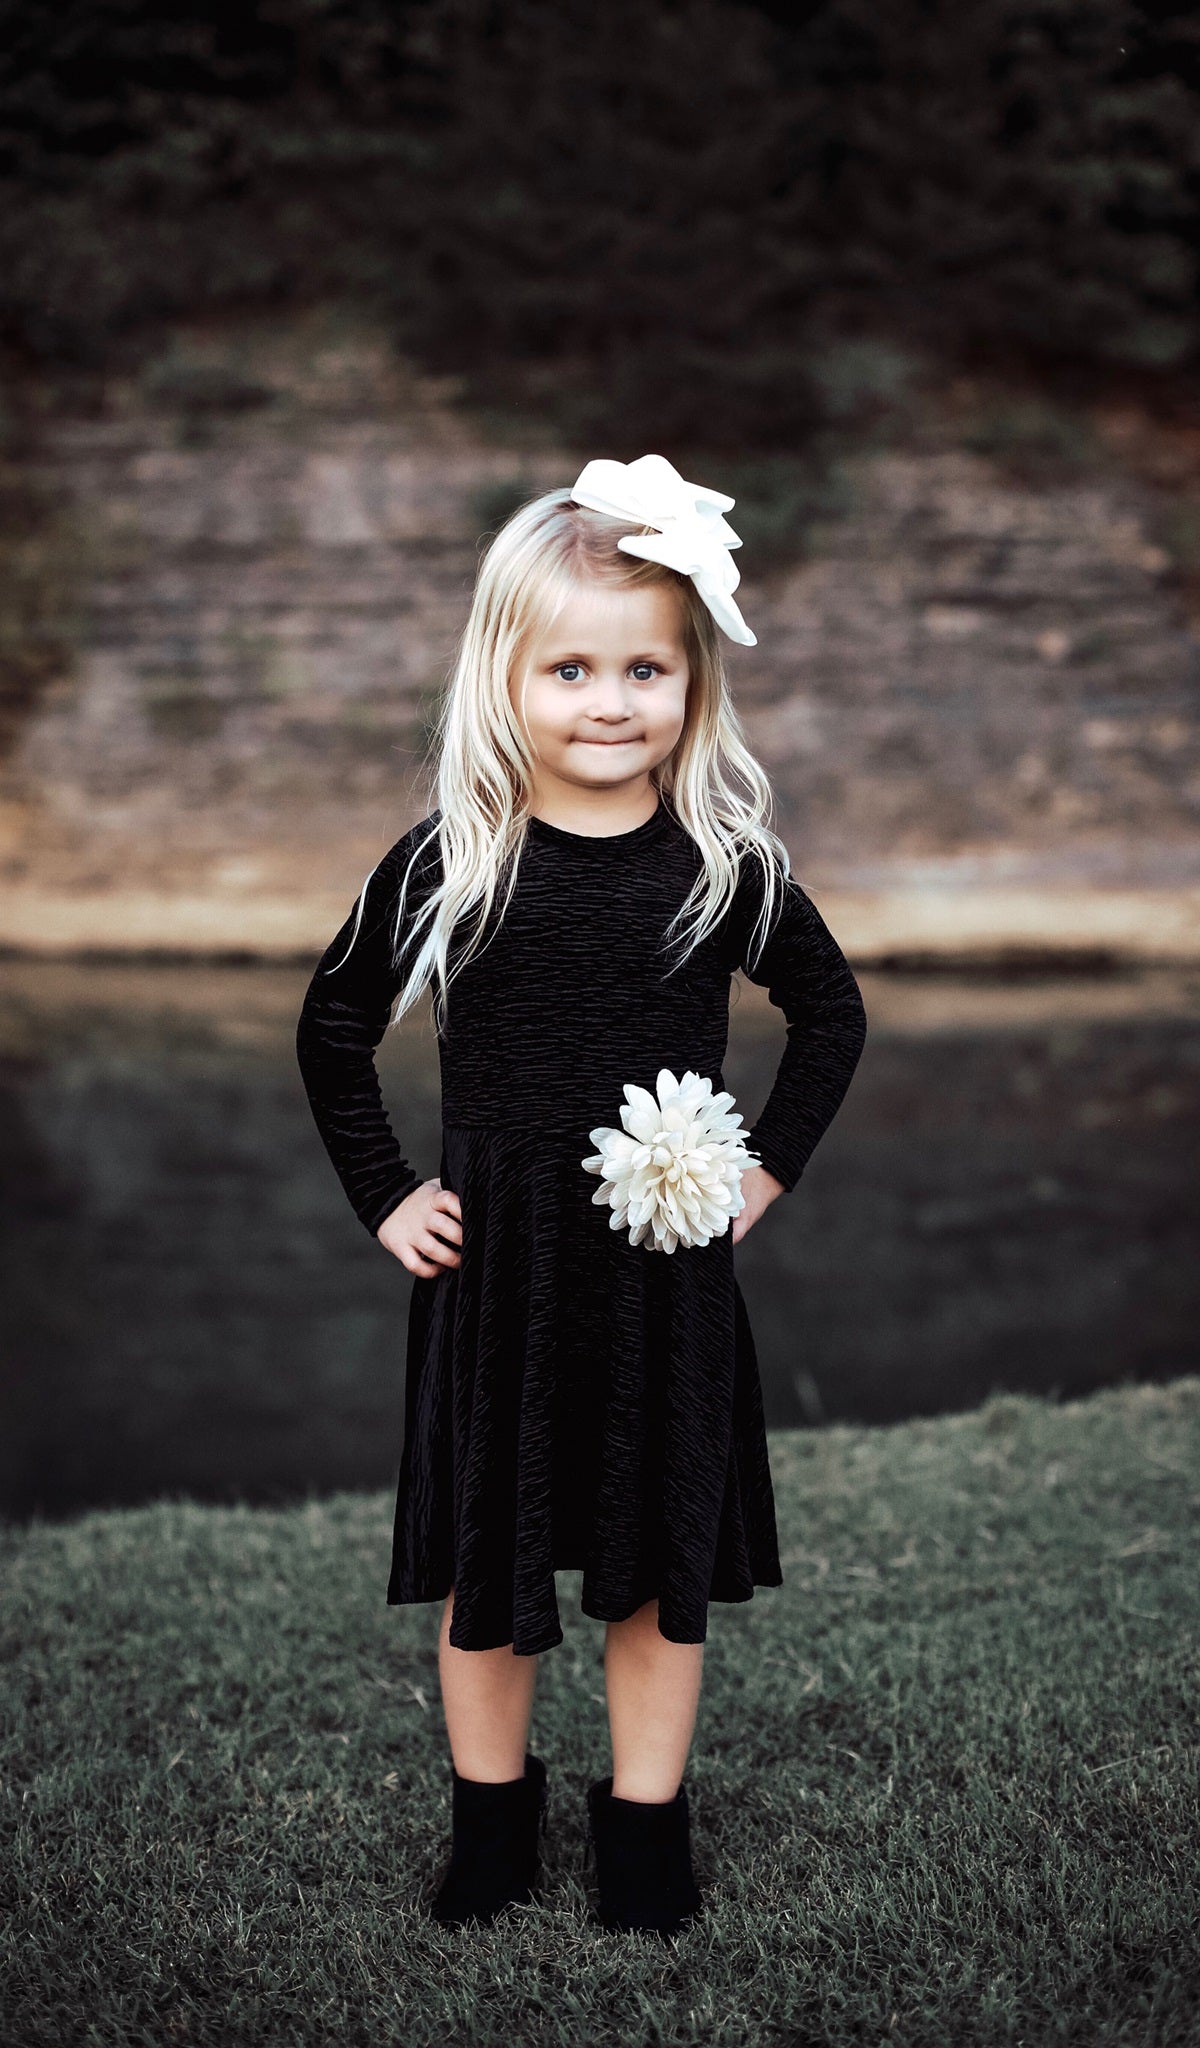 Black Kendyl Kids Twirly Dress worn by little girl with ivory bow in her hair.